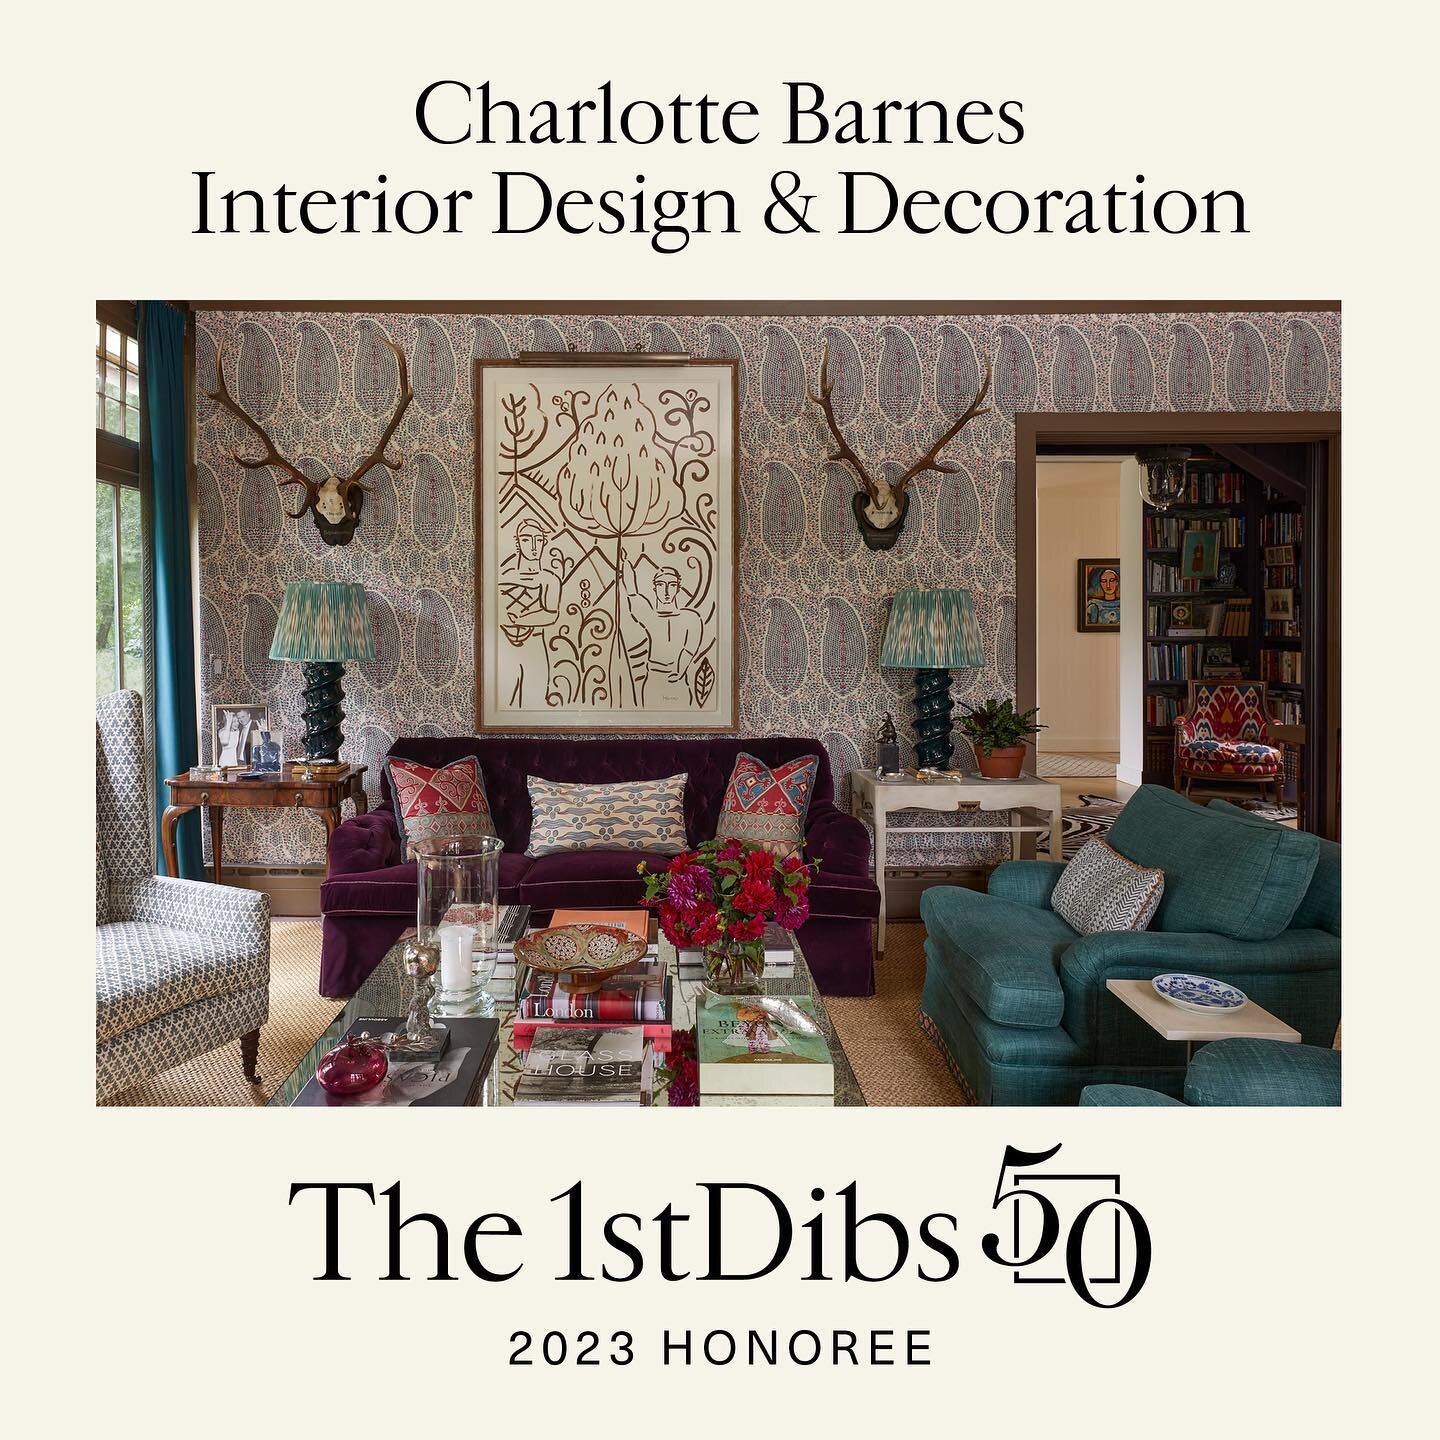 Feeling honored today - thank you @1stdibs @tony1stdibs for including me, in amazing company, on the #1stDibs50 - #traditionalbutnot meets both the mix + the combination. Can traditional design be modern? My answer is yes.
.
Pic @francescolagnese